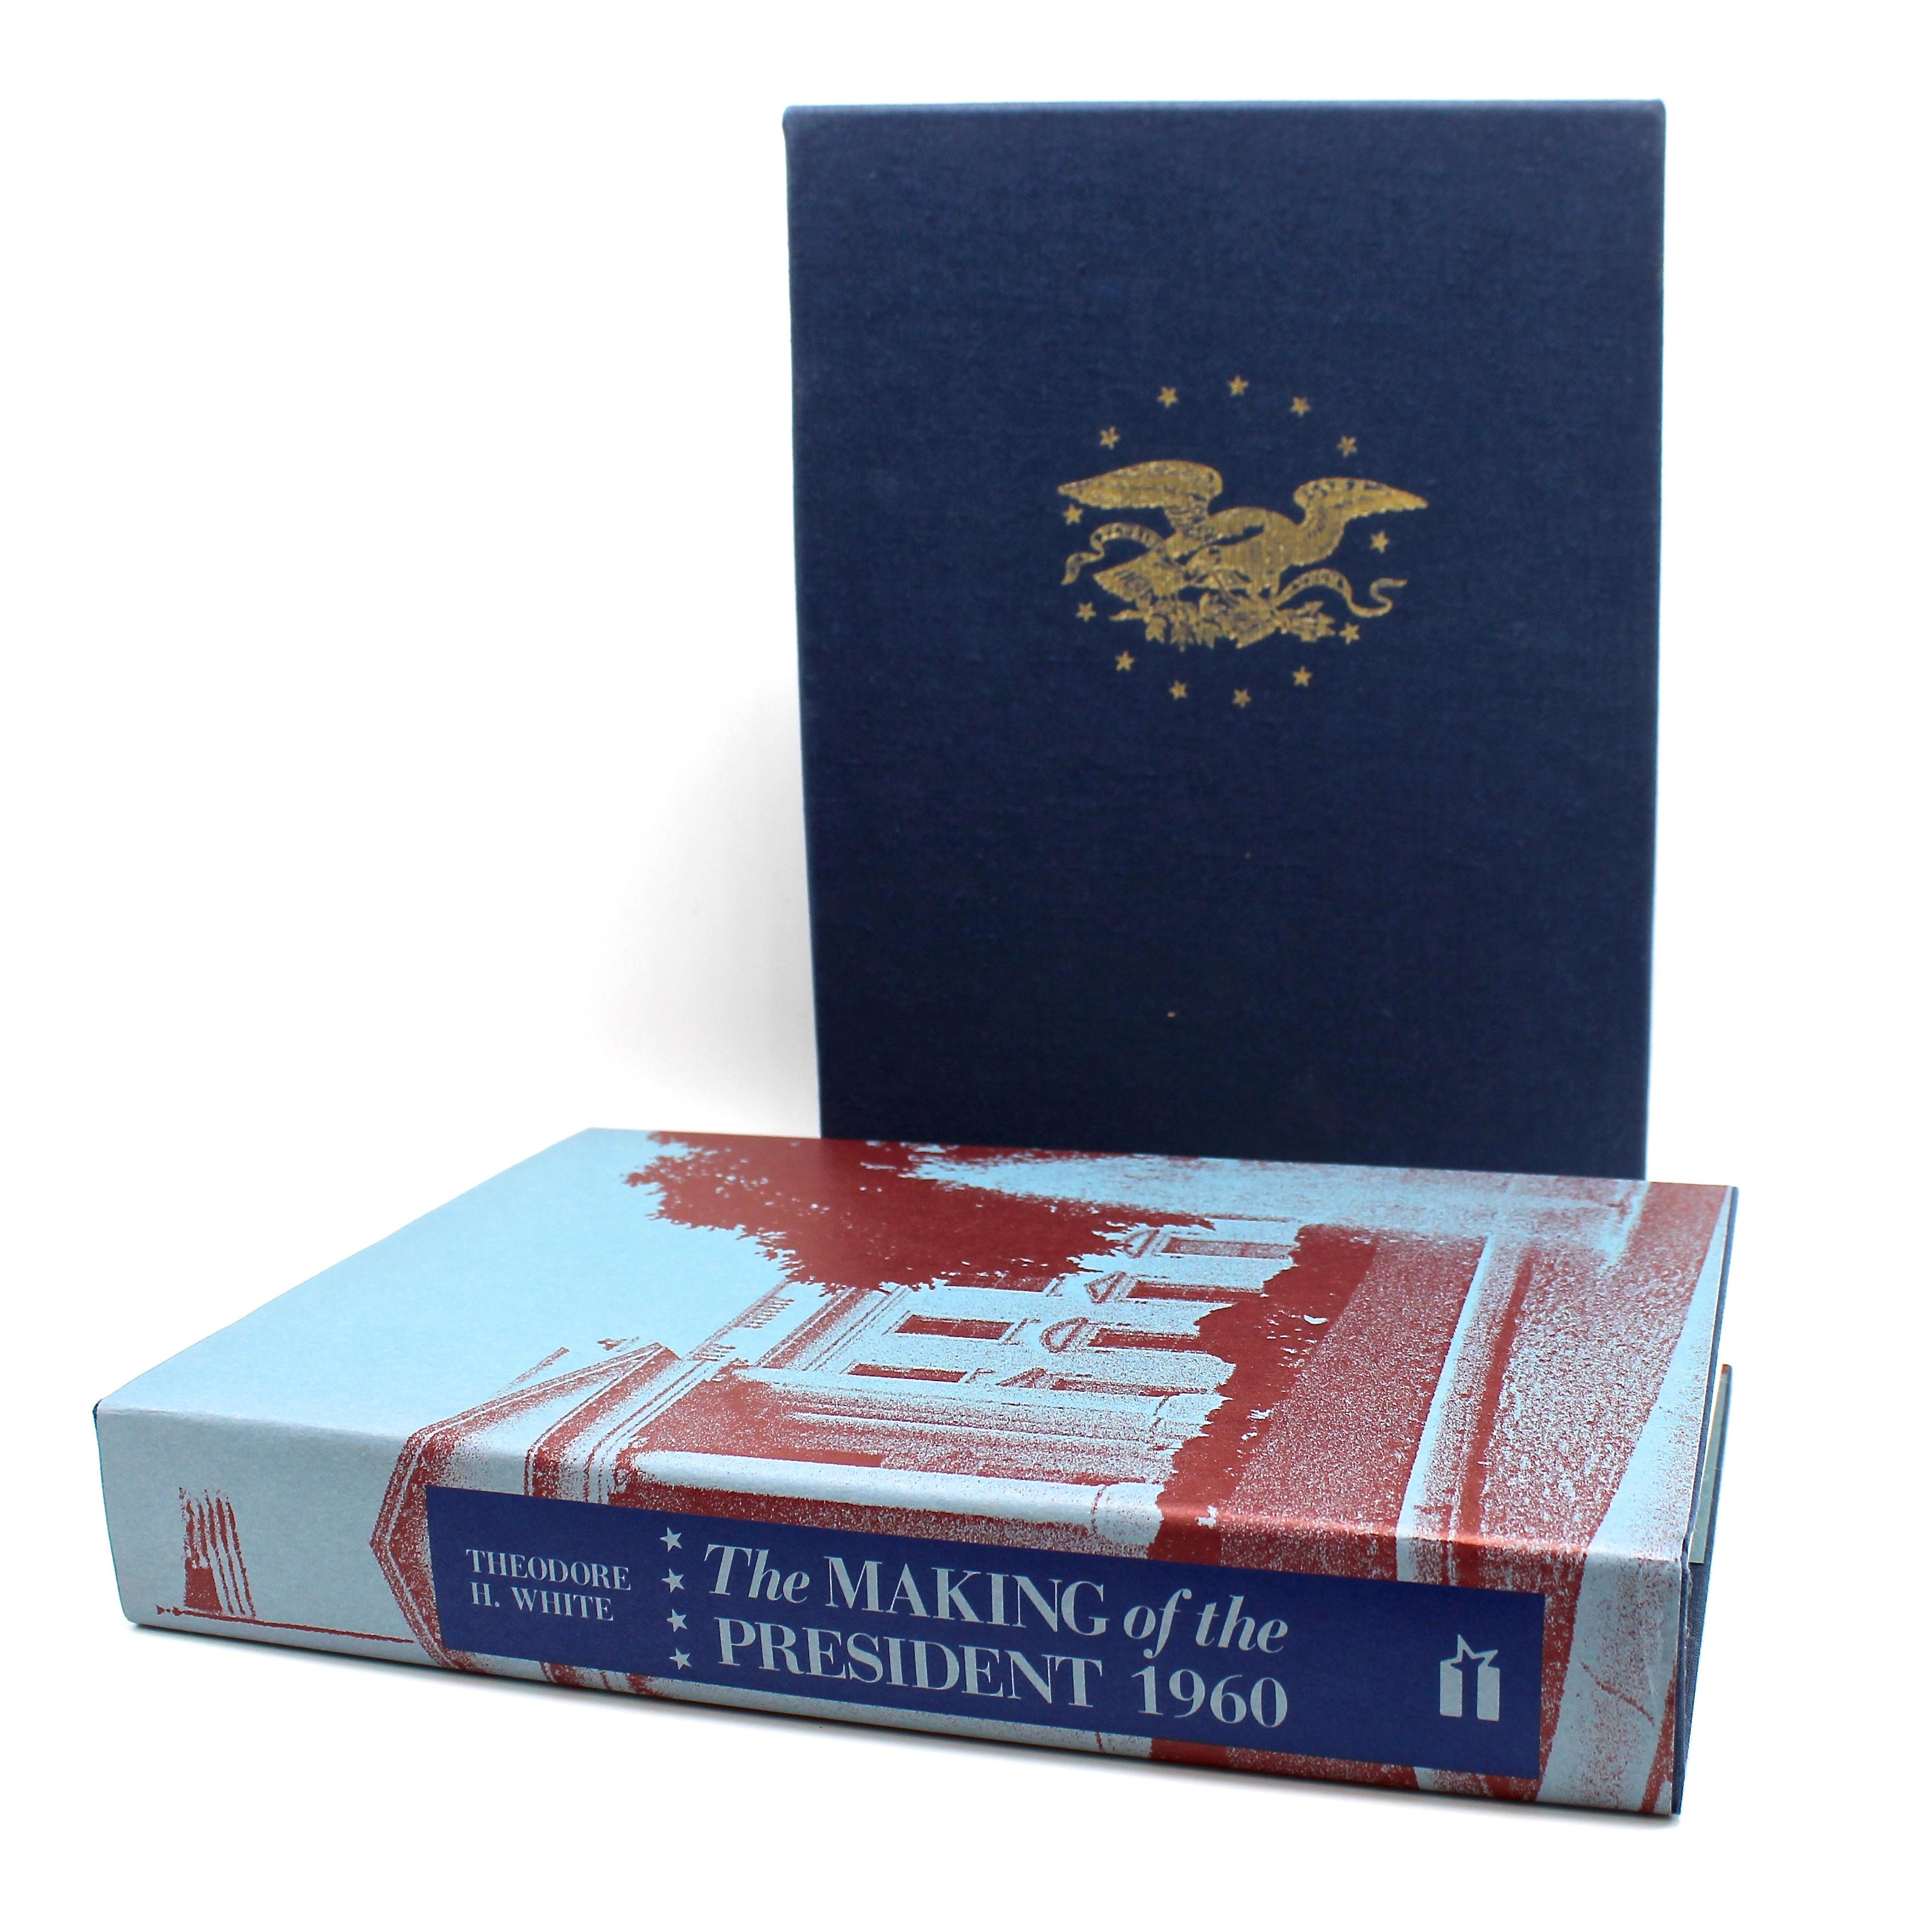 White, Theodore H. The Making of the President 1960. New York: The American Past, 1988. Book of the Month Club edition. Introduction by James Restion with original dust jacket, boards, and slipcase.

This Book of the Month Club edition of The Making